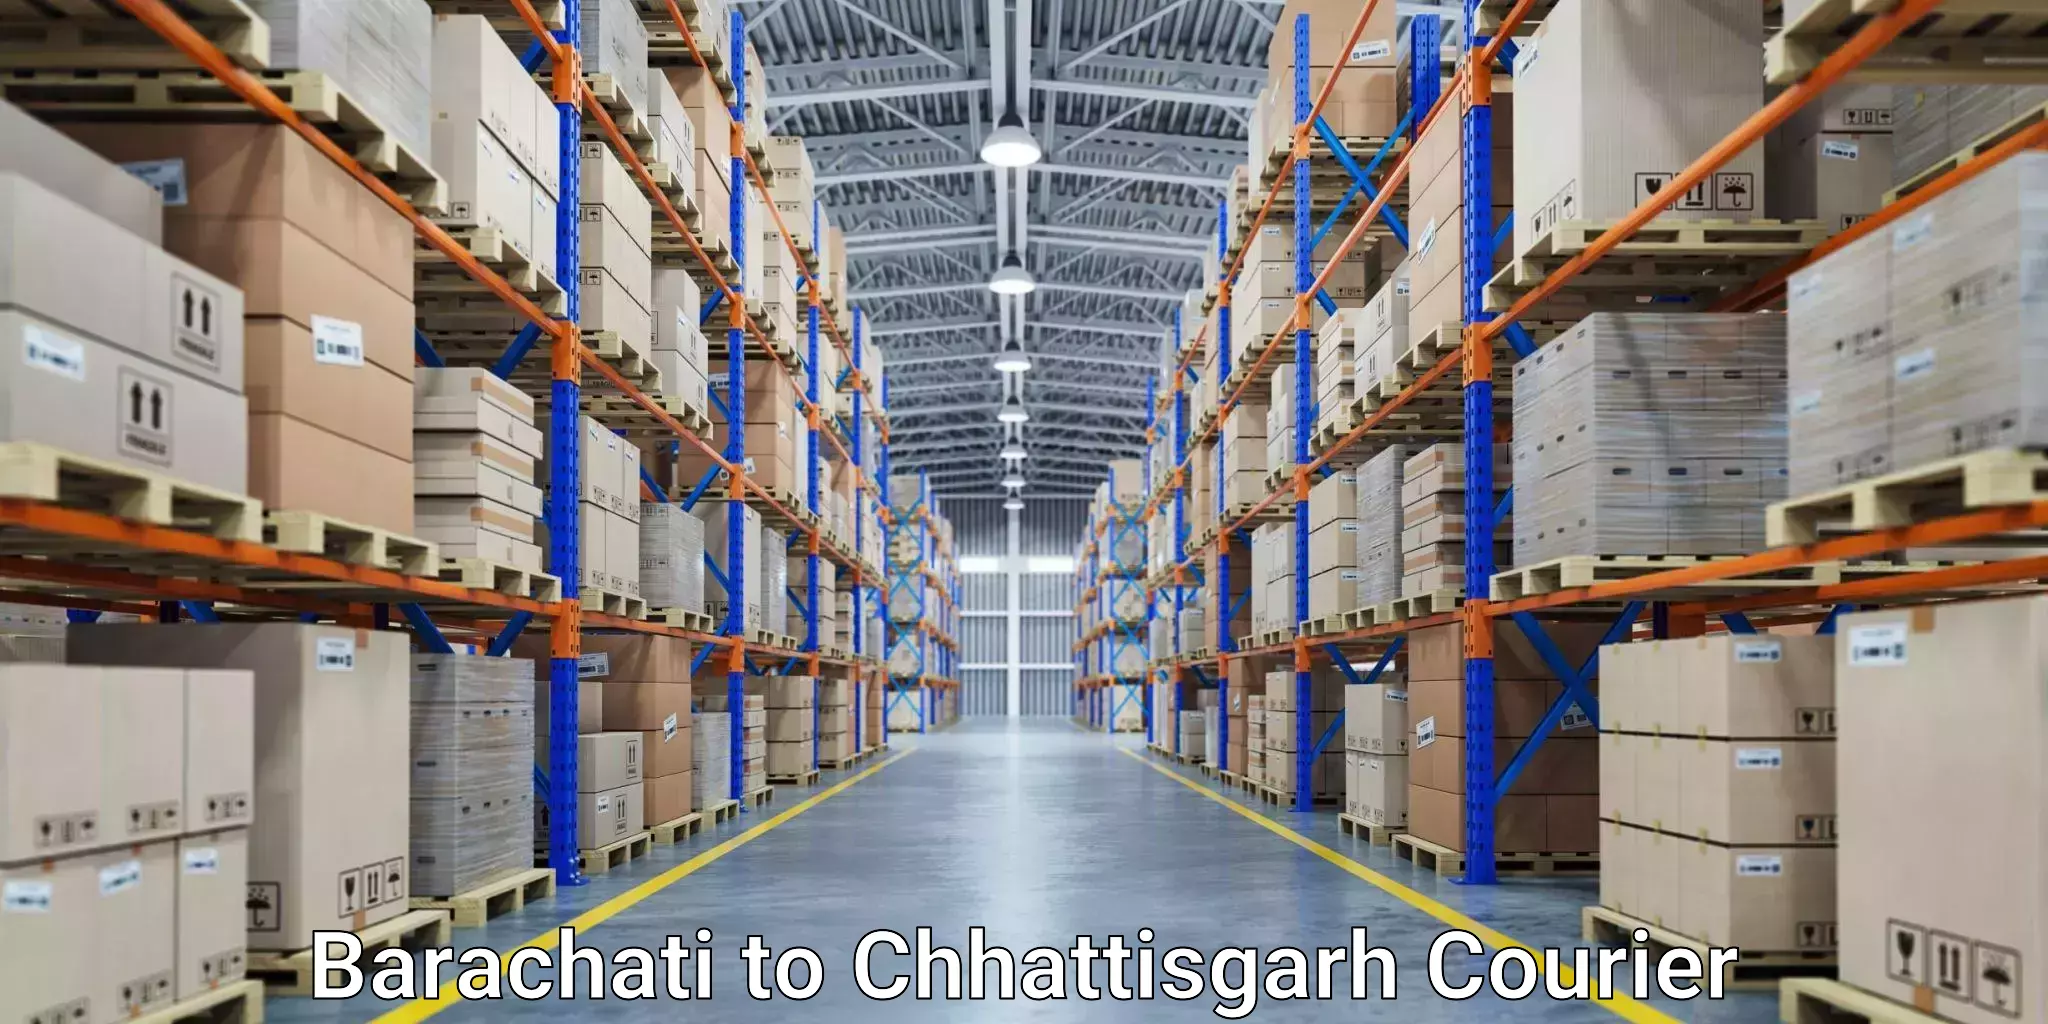 Multi-national courier services Barachati to Nagri